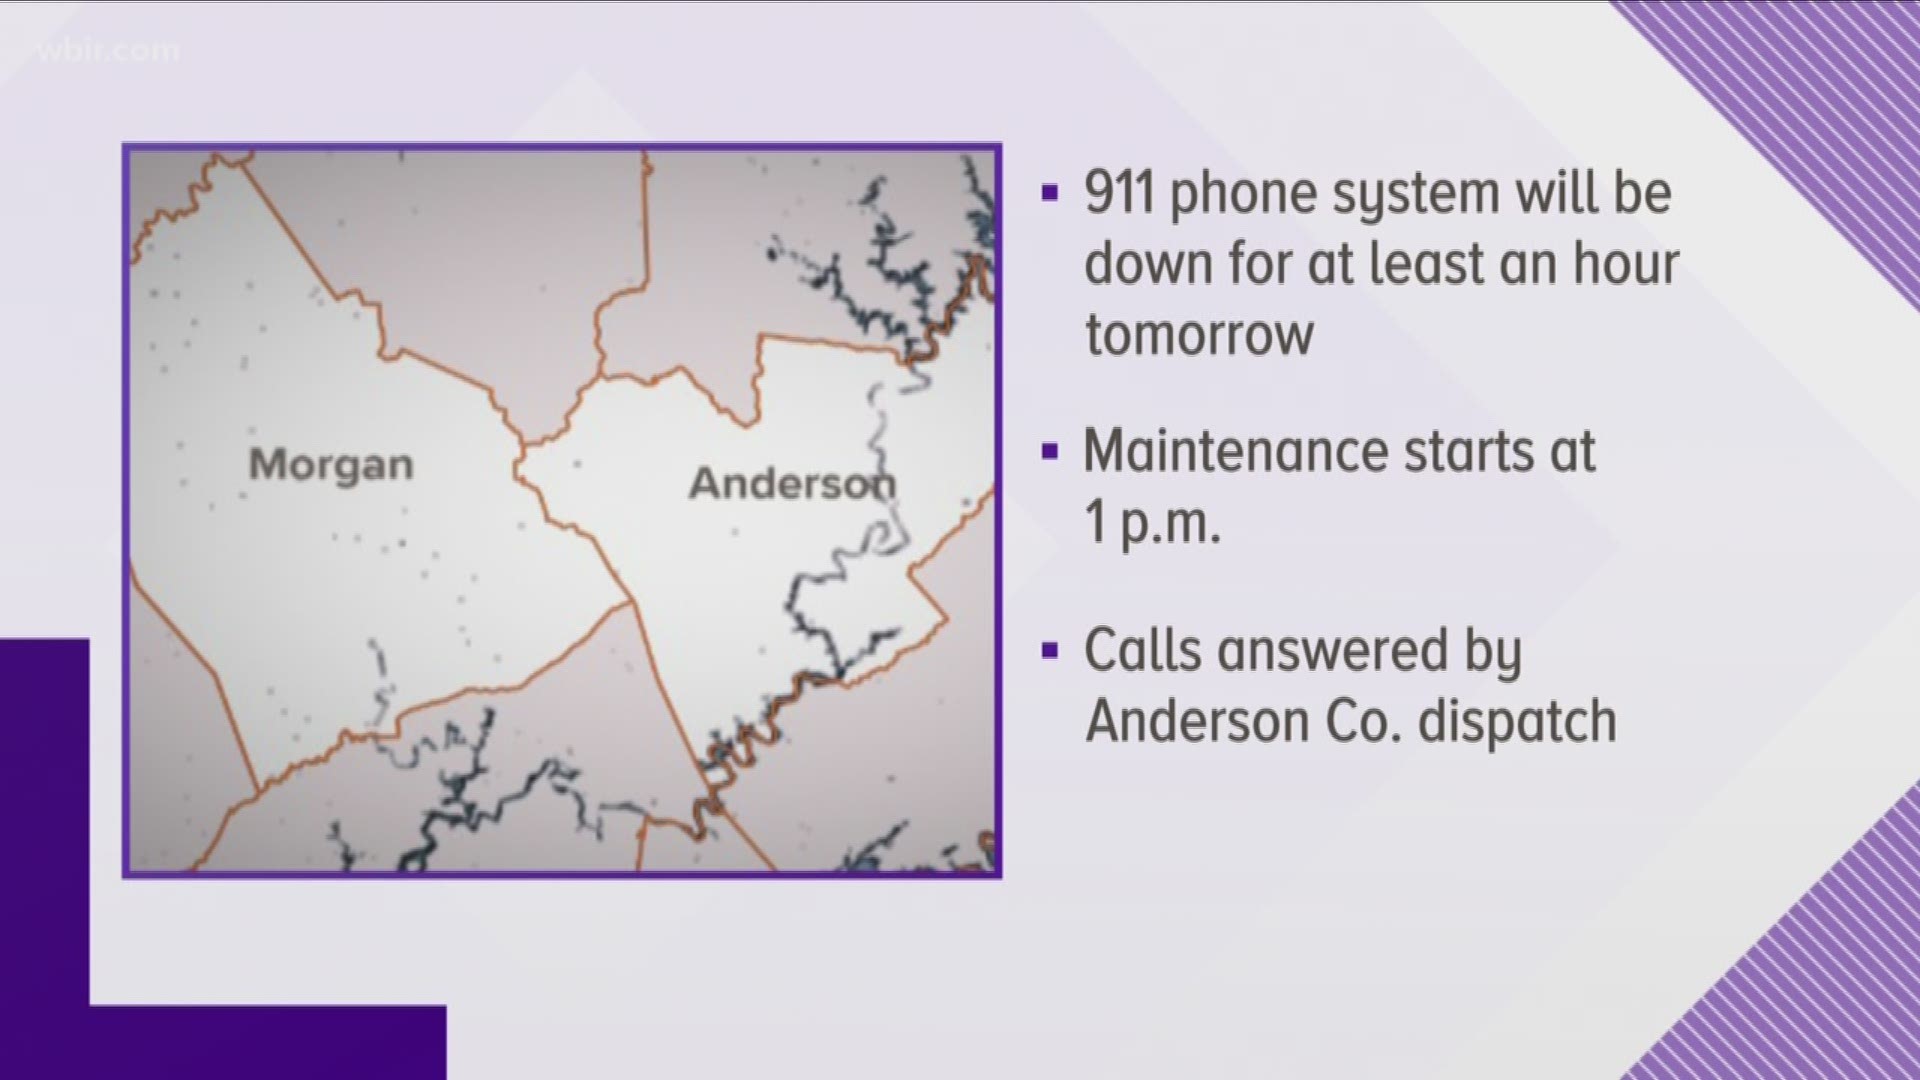 The Morgan County E-911 center will temporarily shut down its phone system for maintenance.